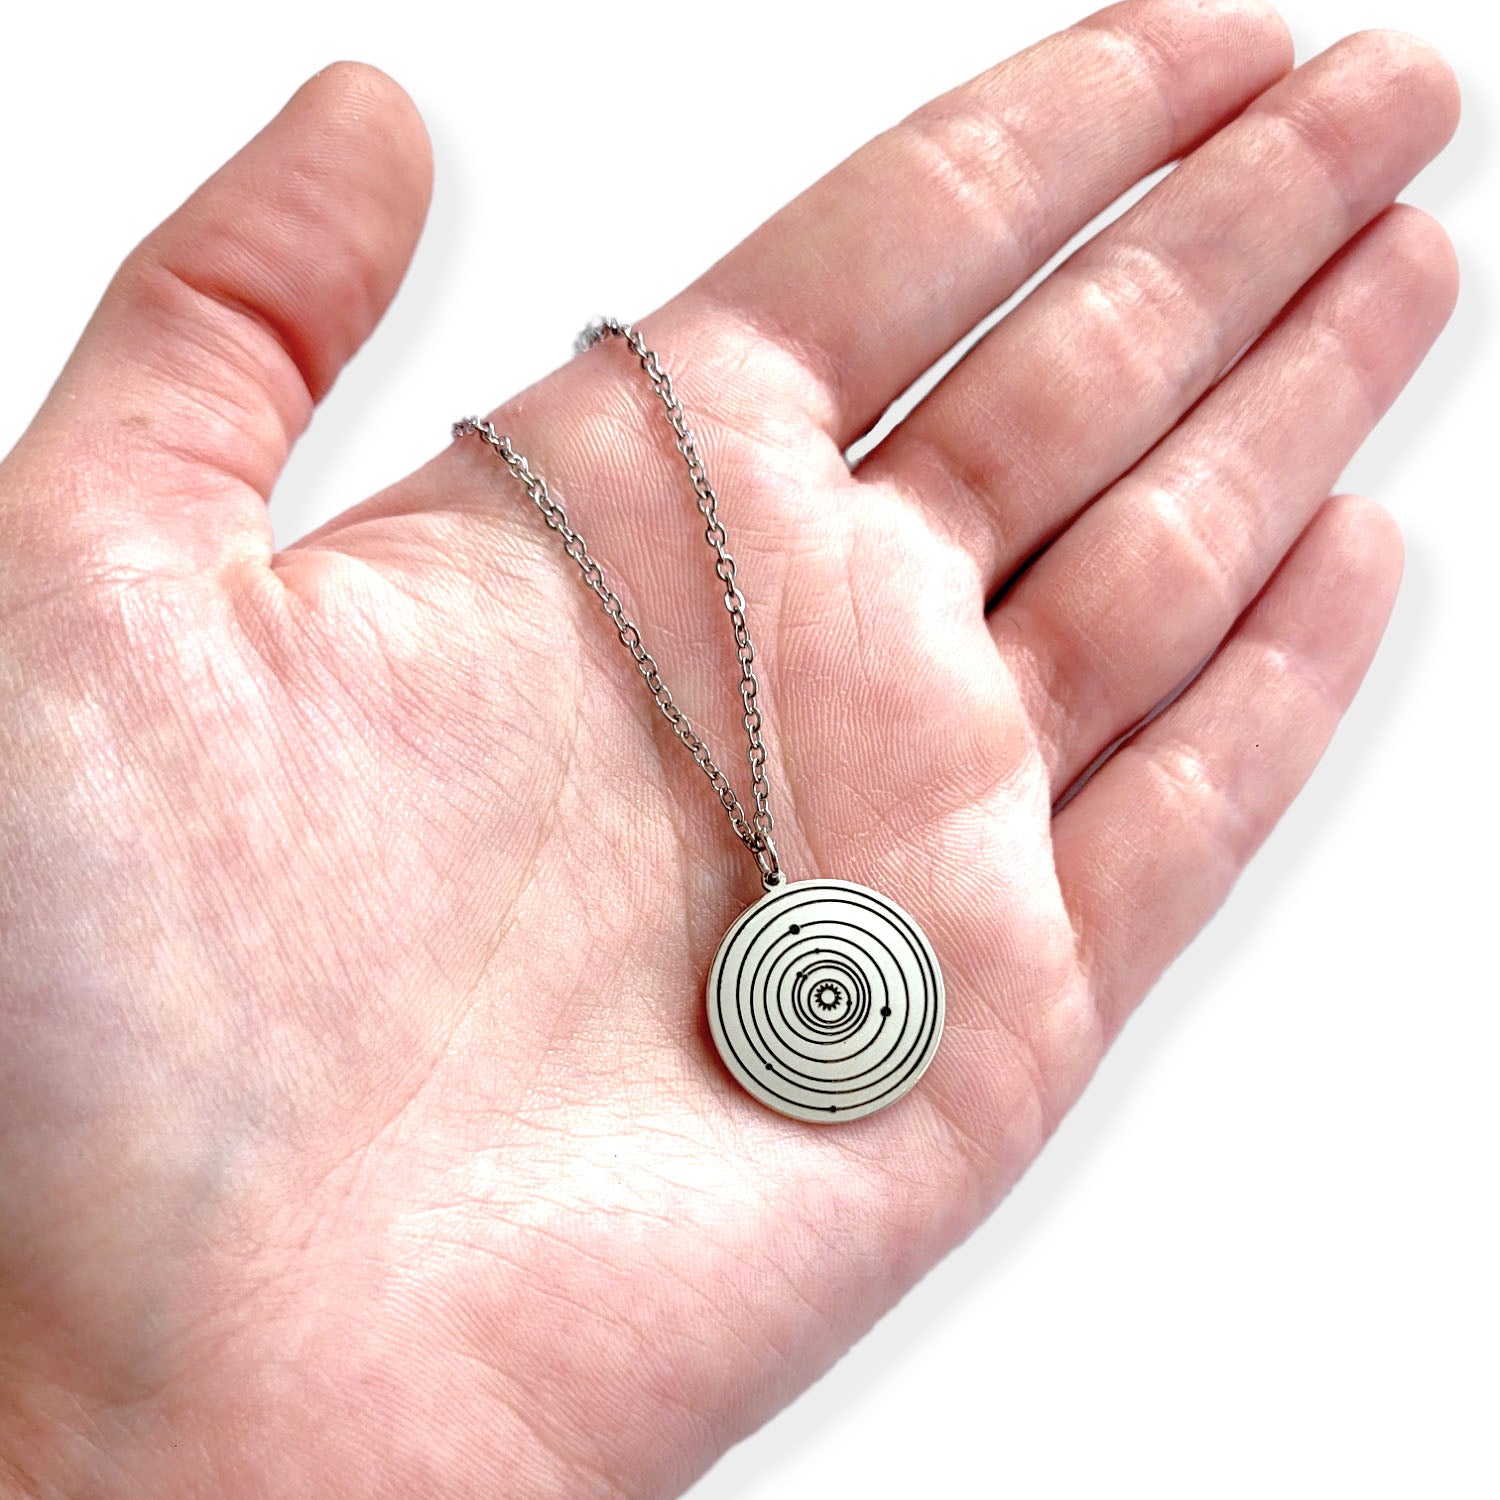 Custom Solar System Necklace in Sterling Silver Small Size